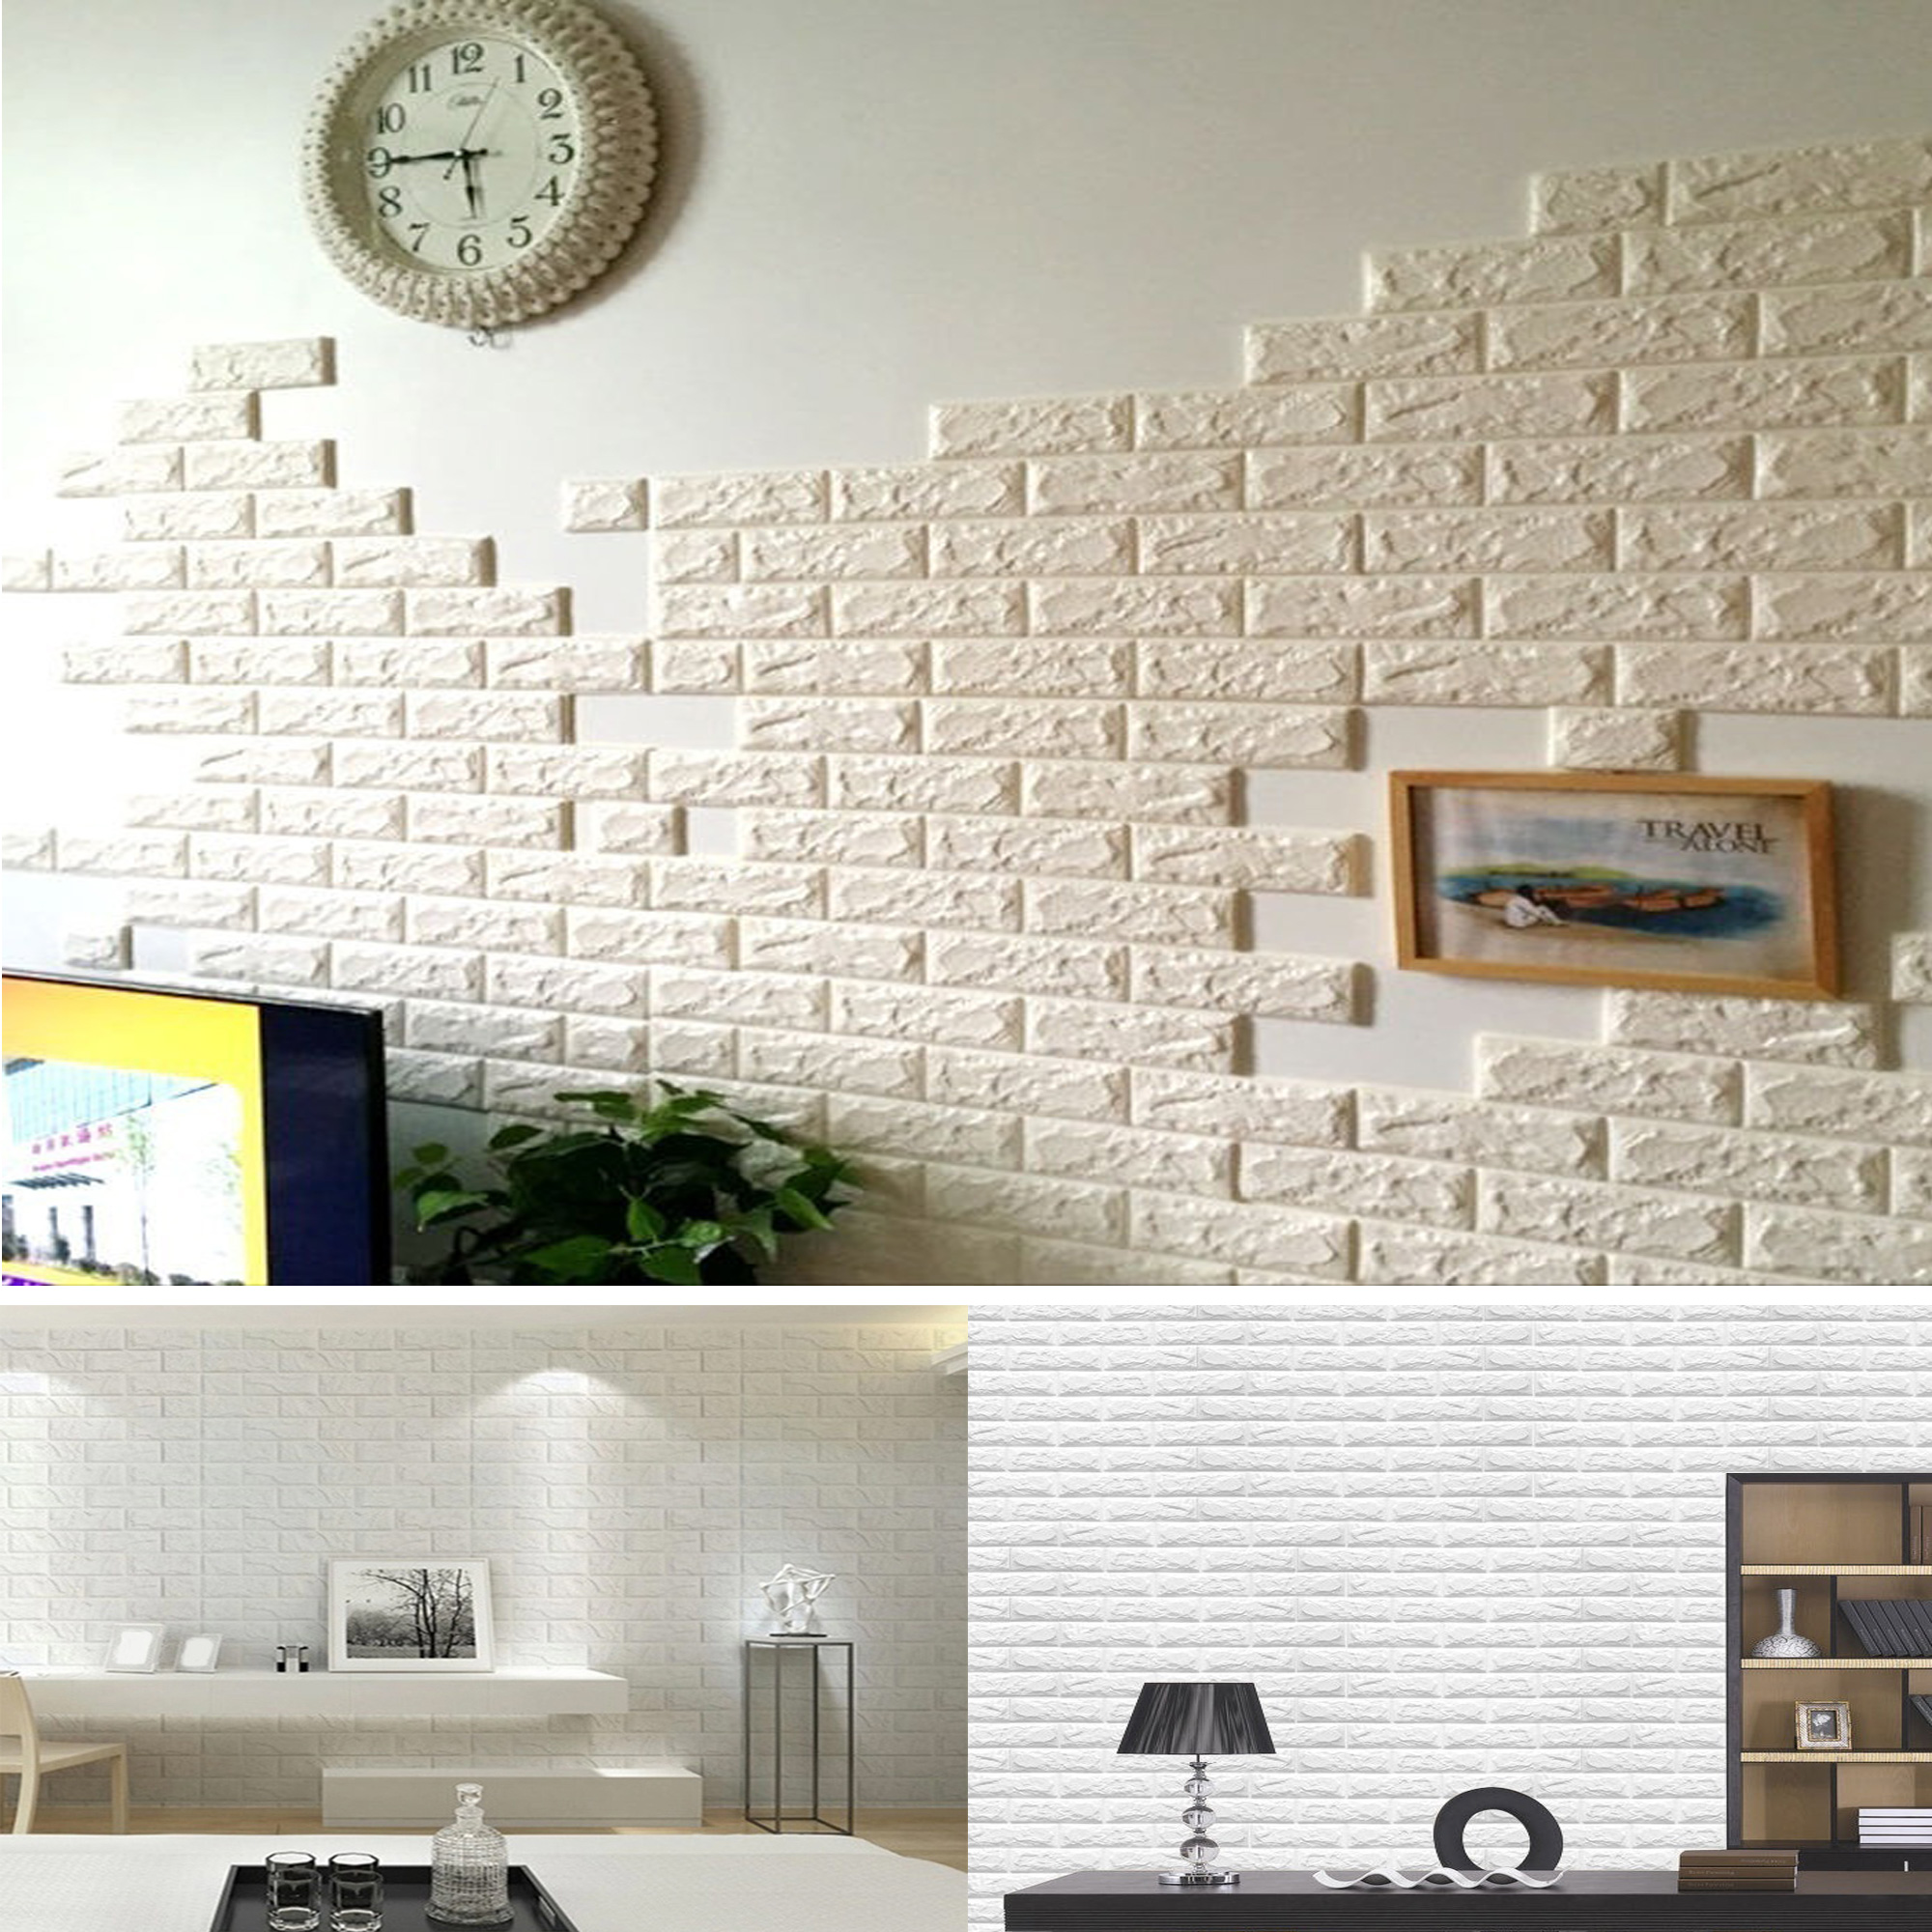 FOCUSSEXY 11.8"x 23.6" 3D Self-Adhesive Wallpaper Faux Foam Real Bricks Effect Wall Panels for TV Walls Sofa Background Bedroom Kitchen Living Room Home Wall Decor - image 1 of 8